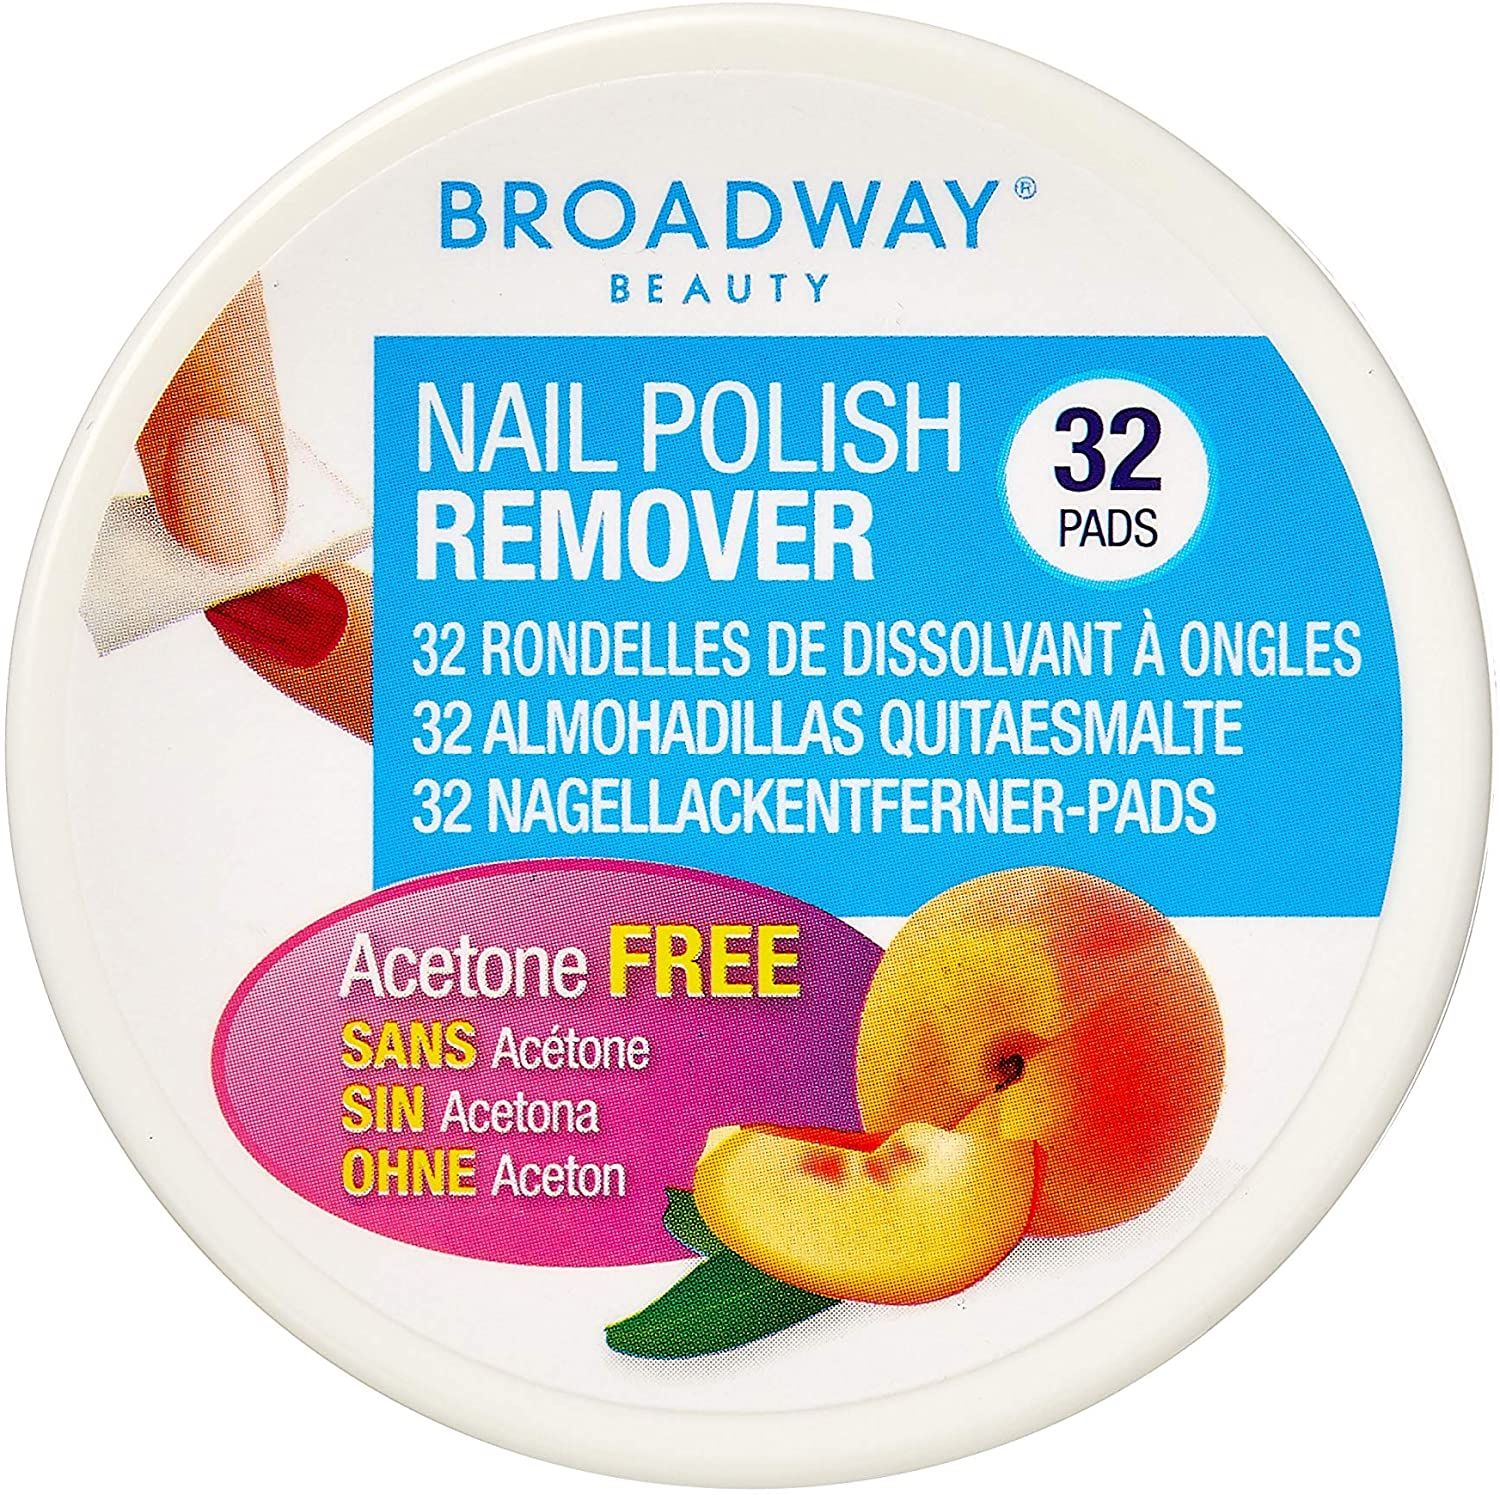 Lot Of 3 Broadway Nail Polish Remover 32 Pads - 36C Peach